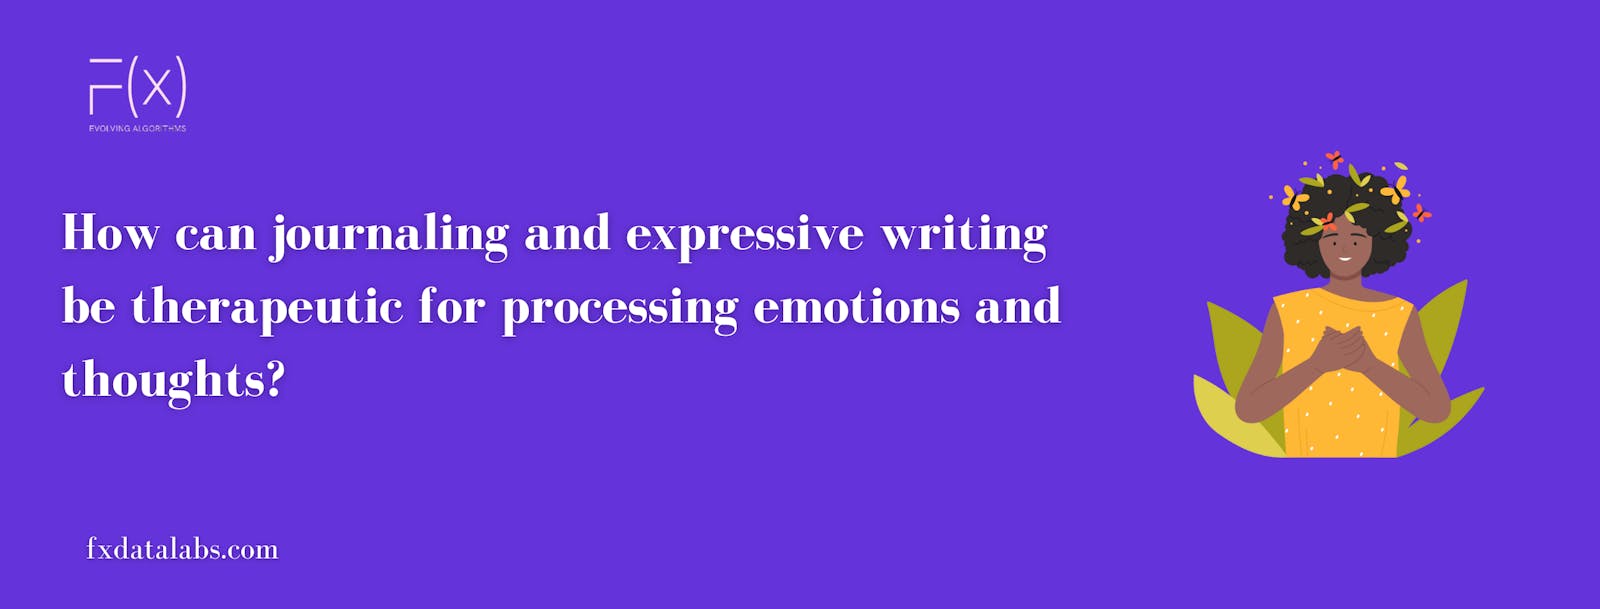 How can  journaling and expressive writing be therapeutic for processing emotions and thoughts?